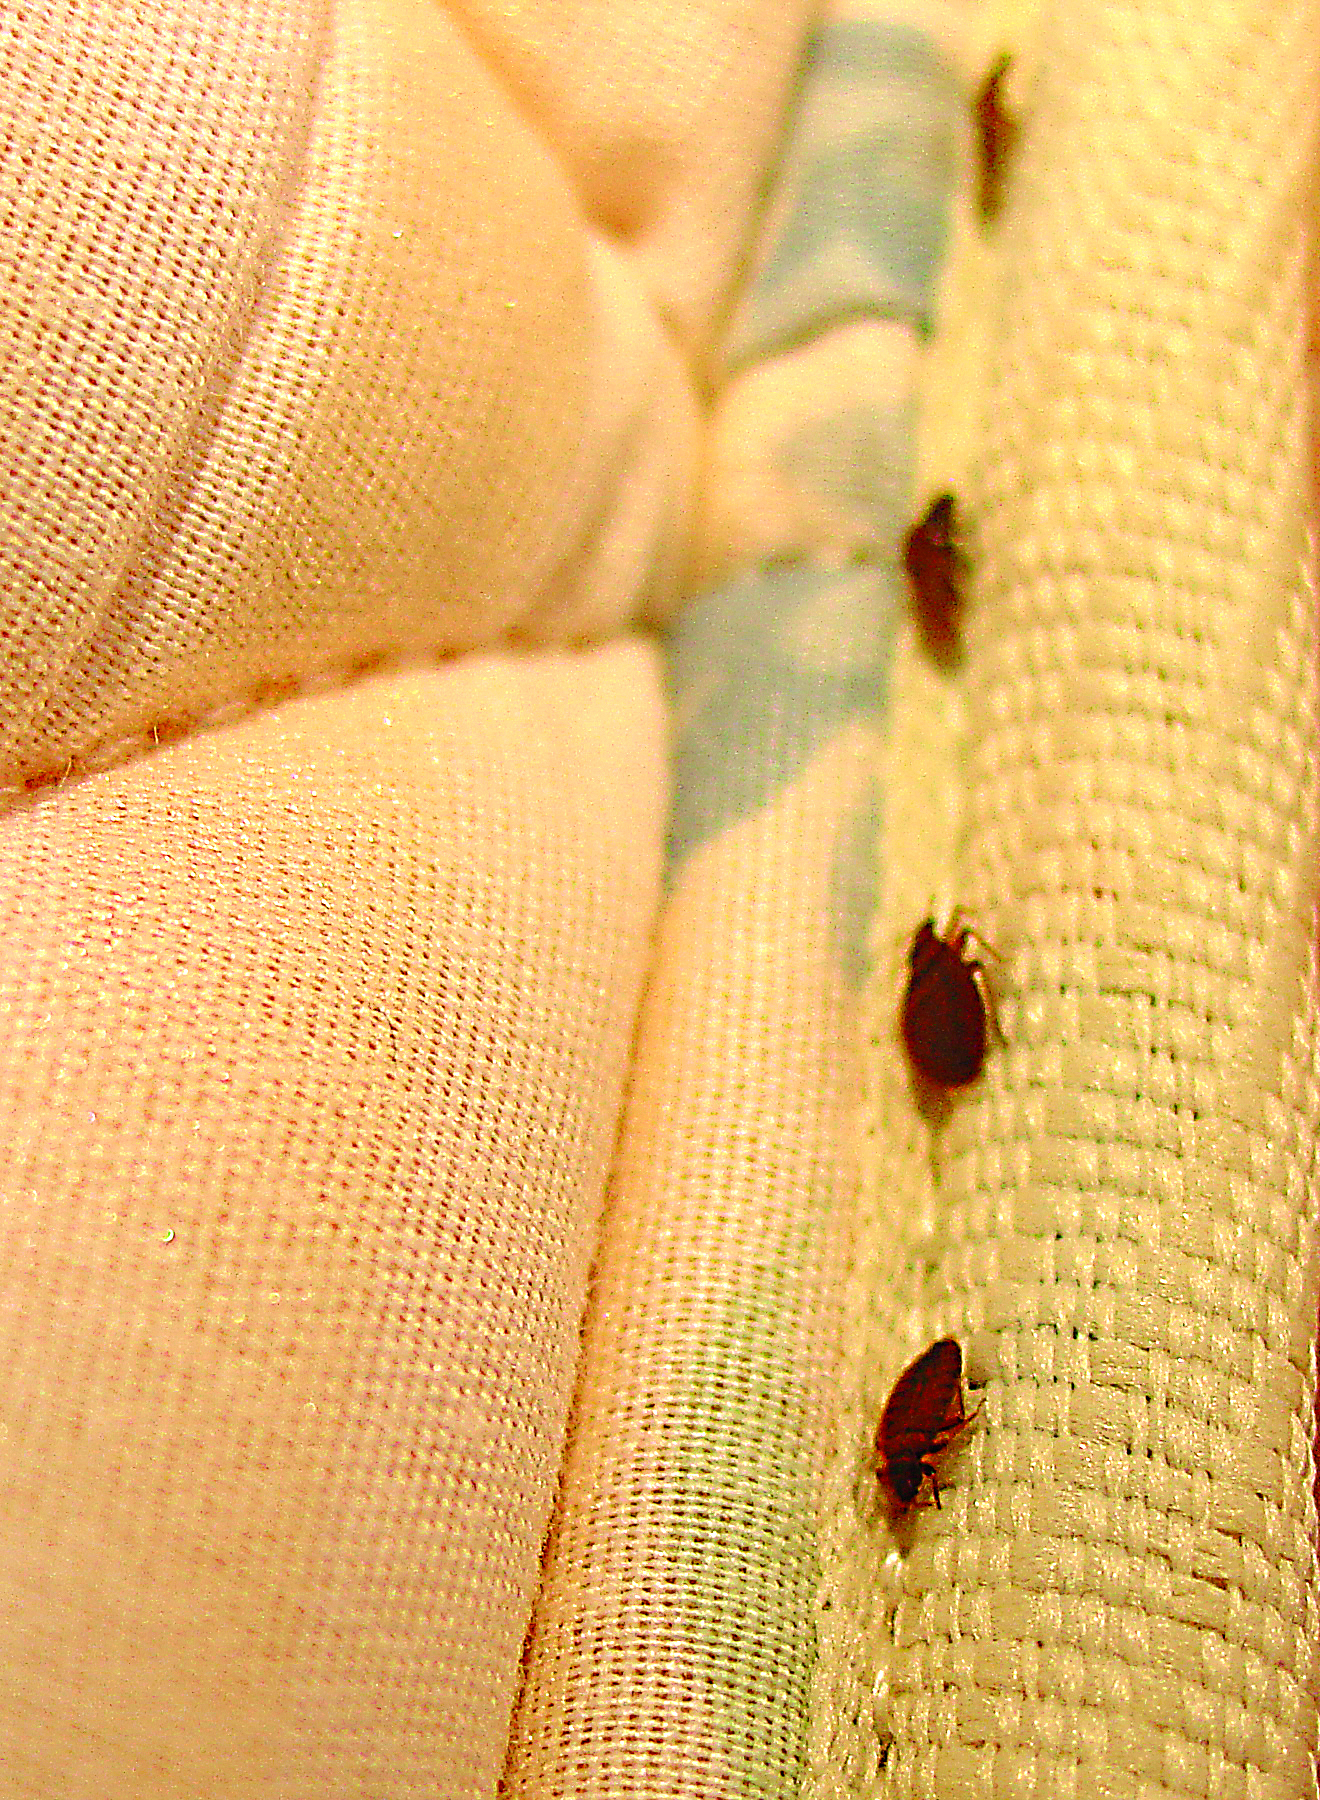 removing bed bugs from mattress